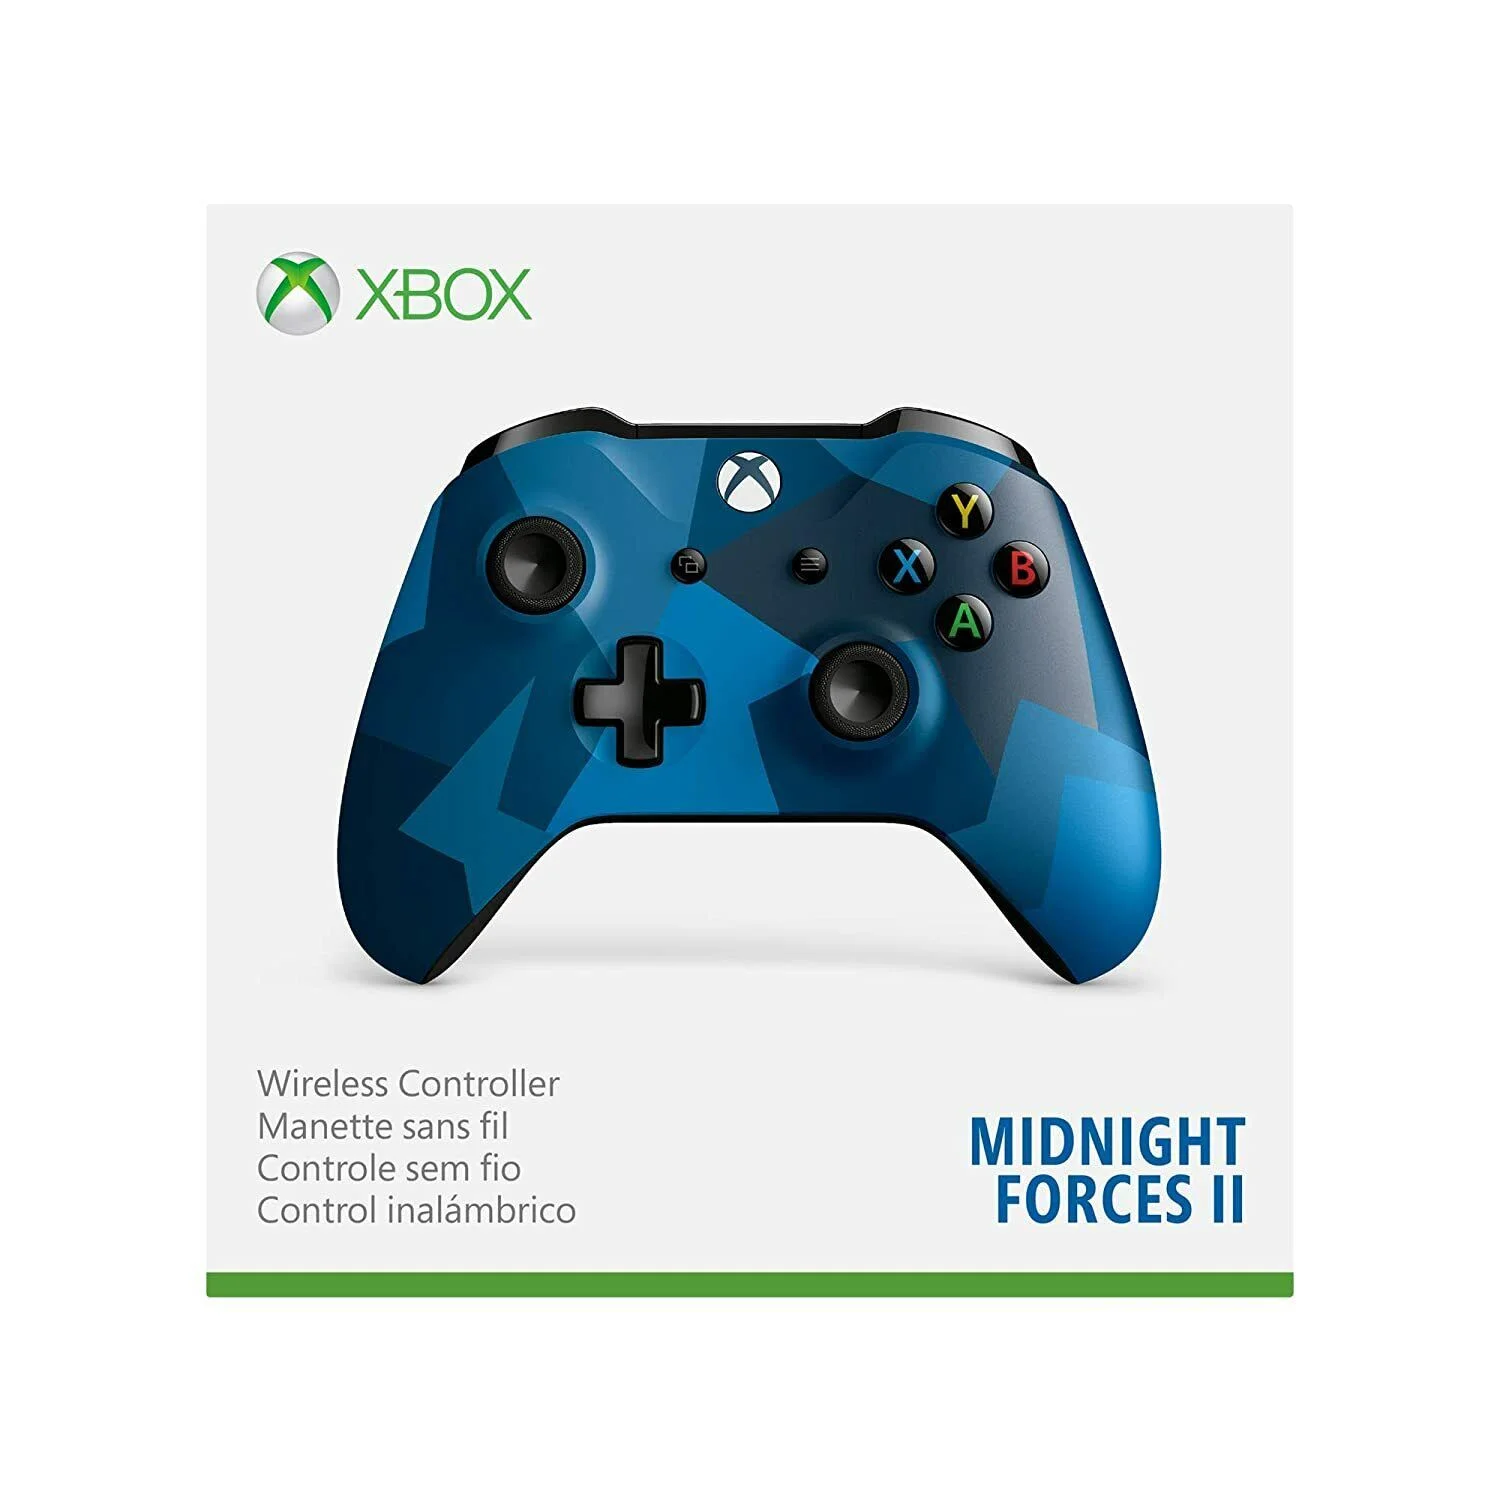  Microsoft Xbox one S Midnight Forces II Controller